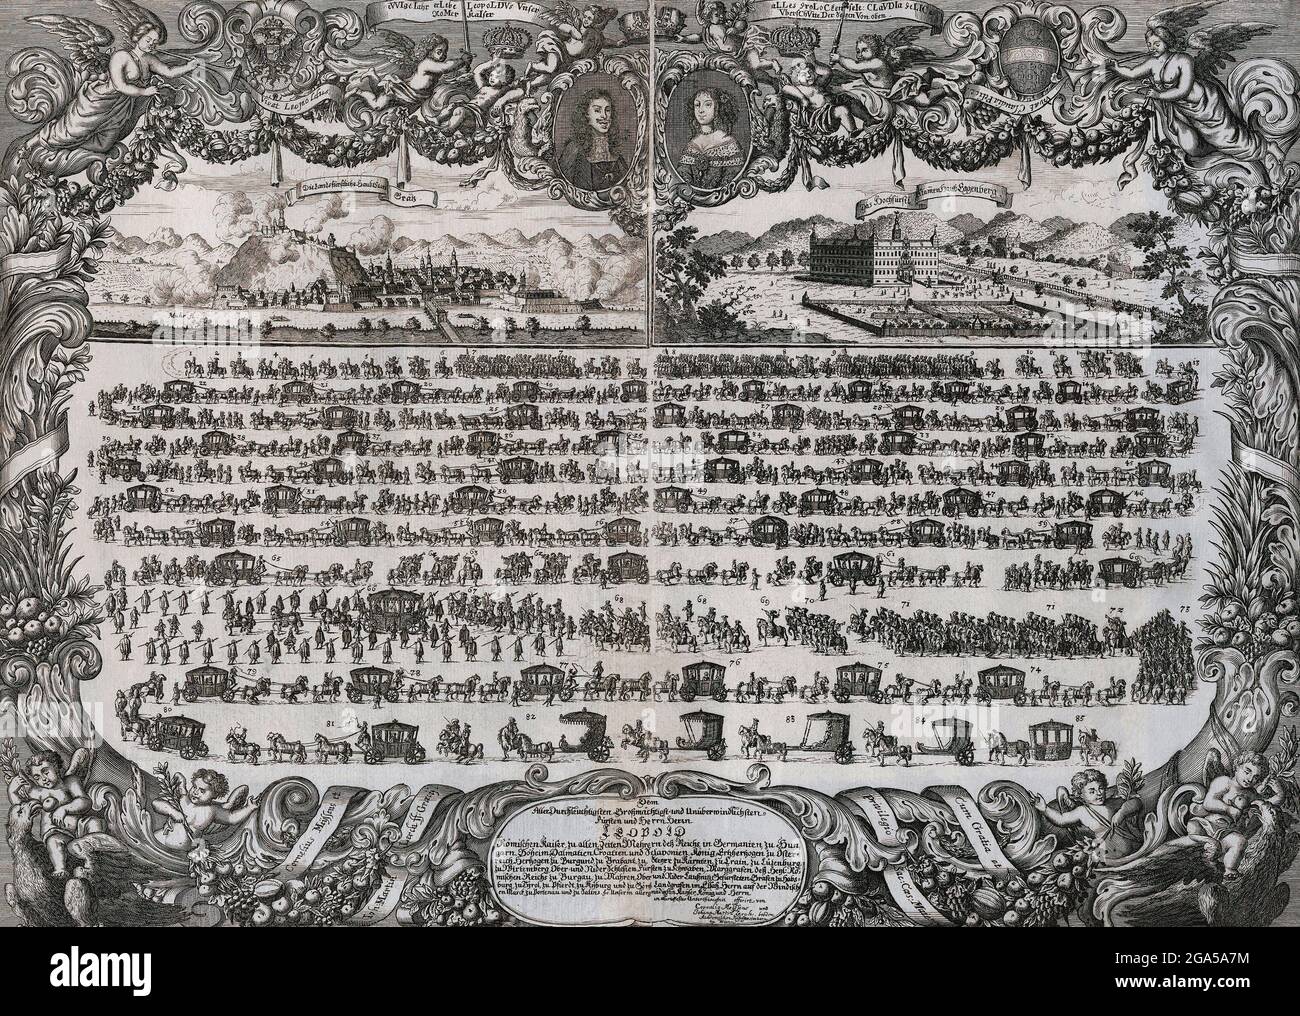 Germany: 'Emperor Leopold's Wedding with Claudia Felicitas of Austria, Graz, 15 October 1673', copper engraving by Cornelis Meyssens and Johann Martin Lerch (1643-1693), c. 1673. Leopold I (1640-1705) was the second son of Emperor Ferdinand III, and became heir apparent after the death of his older brother, Ferdinand IV. He was elected Holy Roman Emperor in 1658 after his father's death, and by then had also already become Archduke of Austria and claimed the crowns of Germany, Croatia, Bohemia and Hungary. Stock Photo